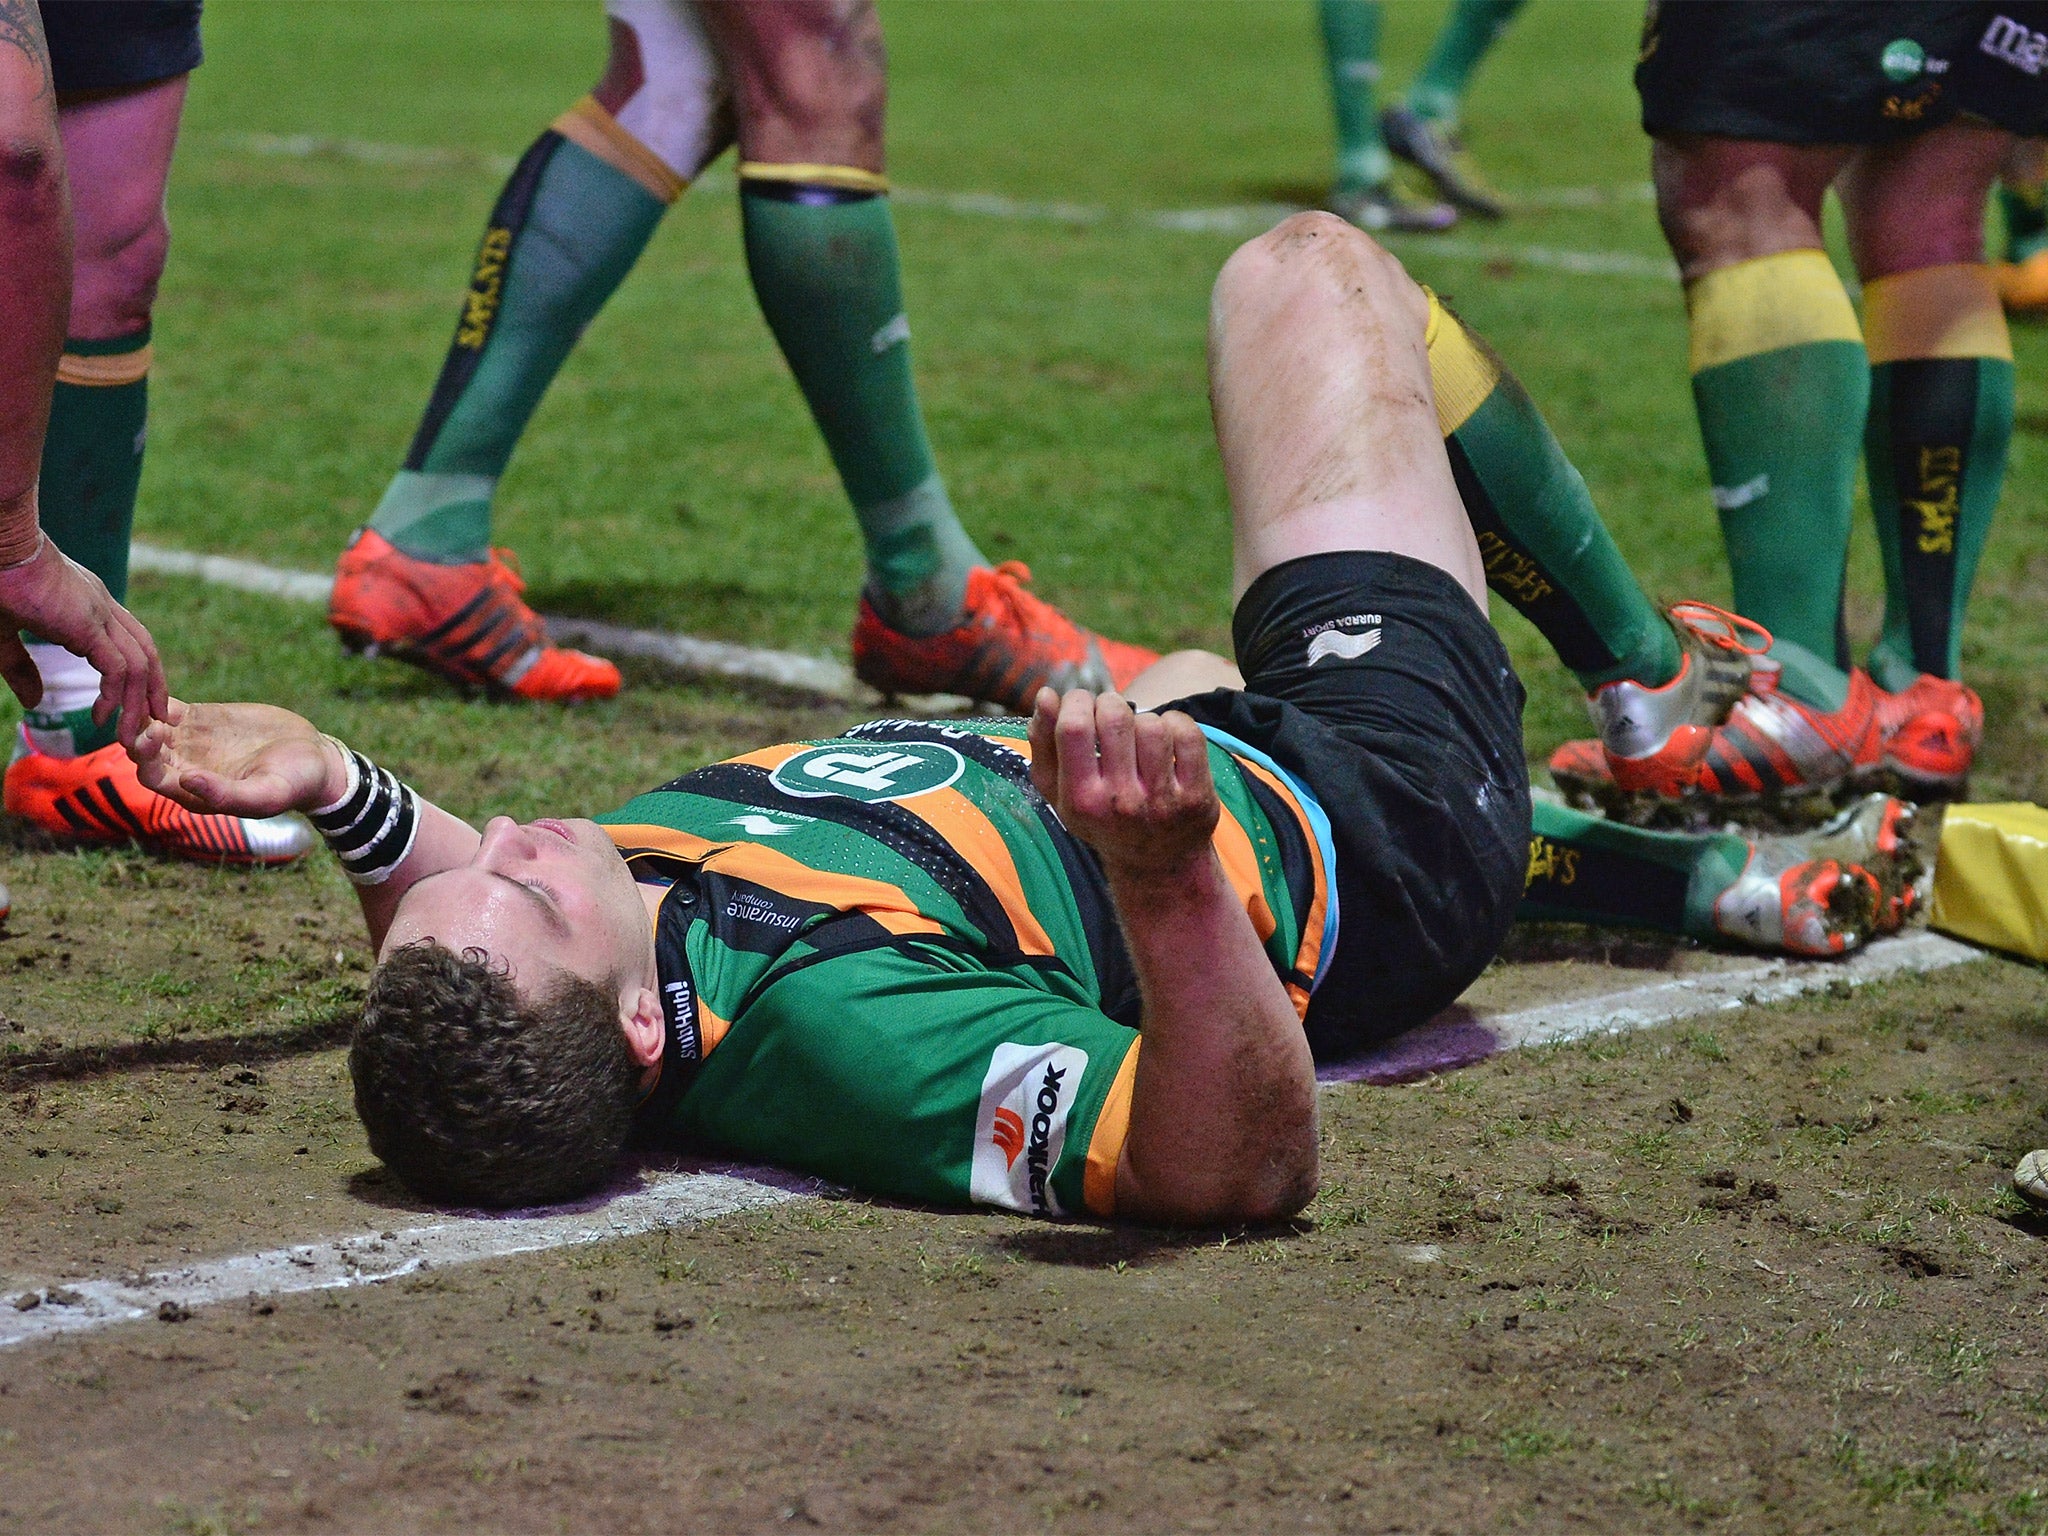 George North is left flat out after being kneed in the head against Wasps on Friday